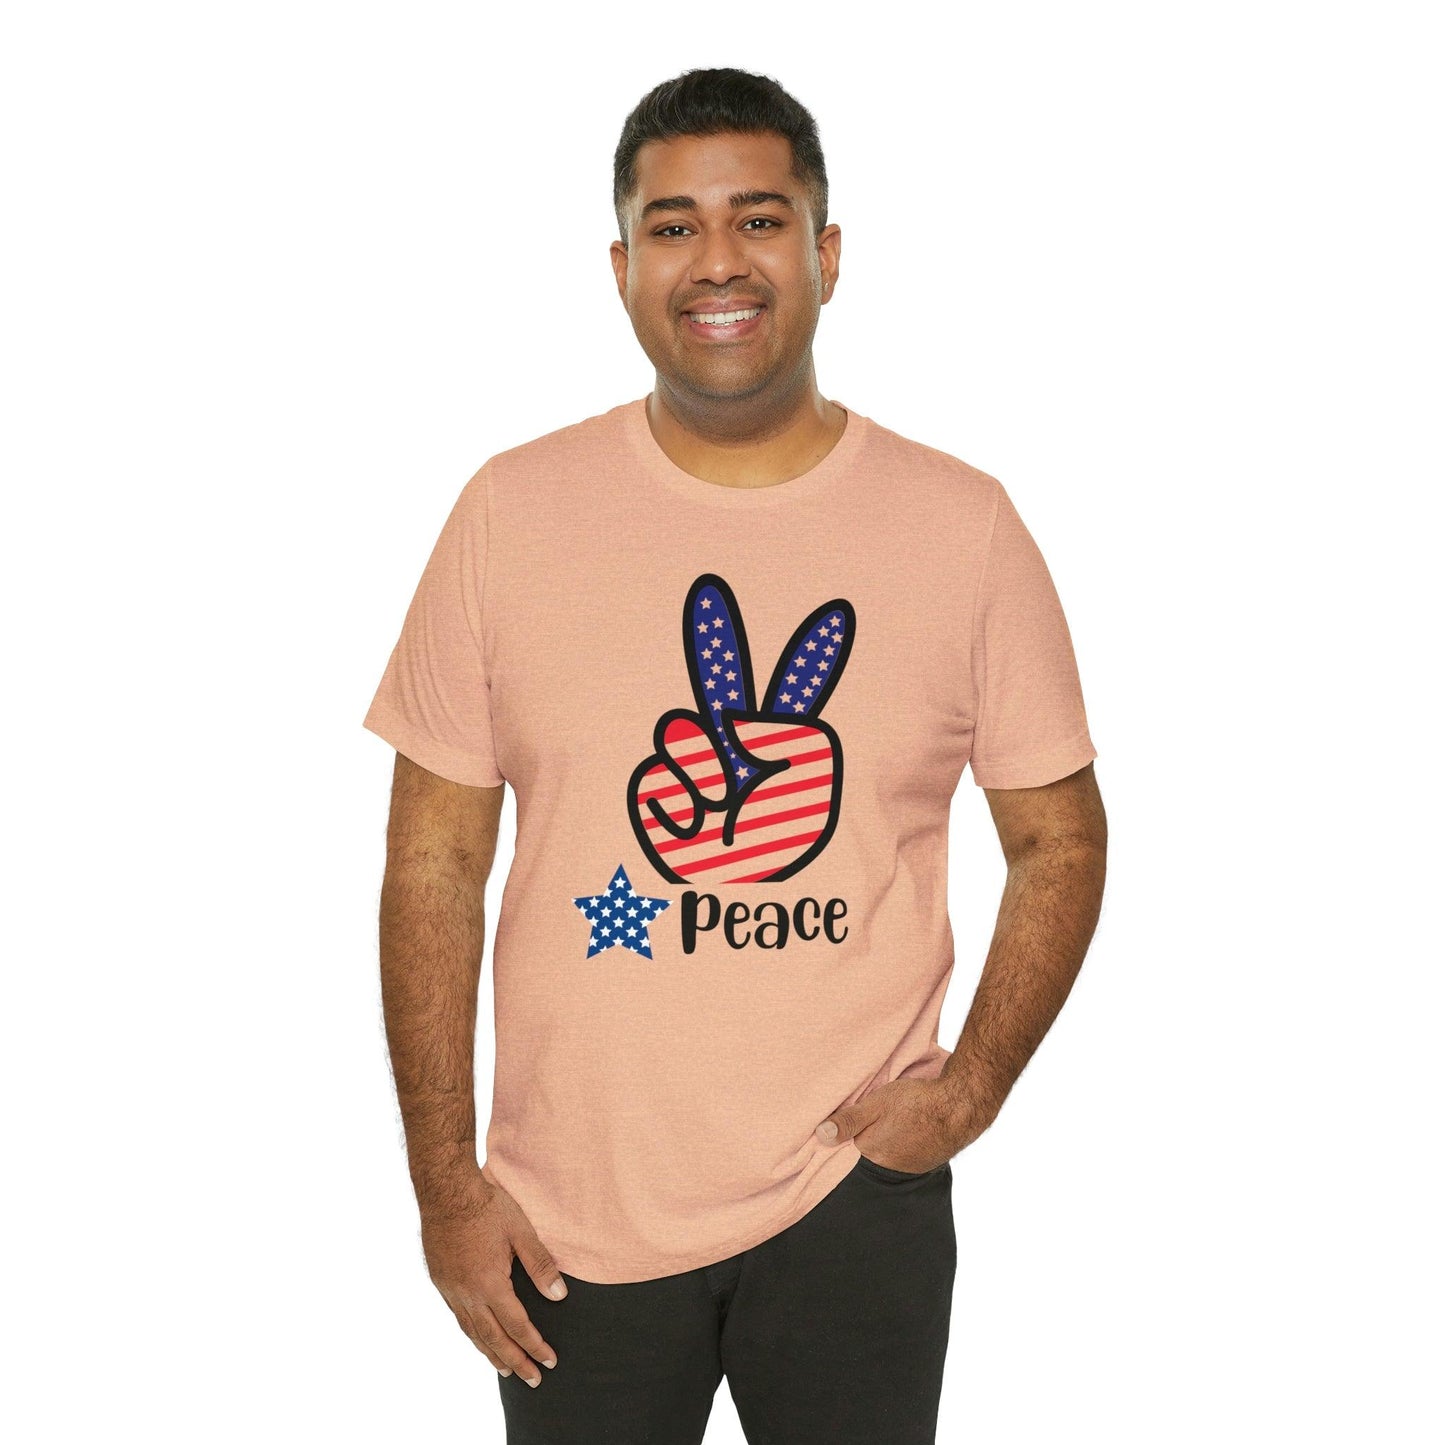 Memorial Day shirt, Peace shirt, Independence Day, 4th of July shirt - Giftsmojo